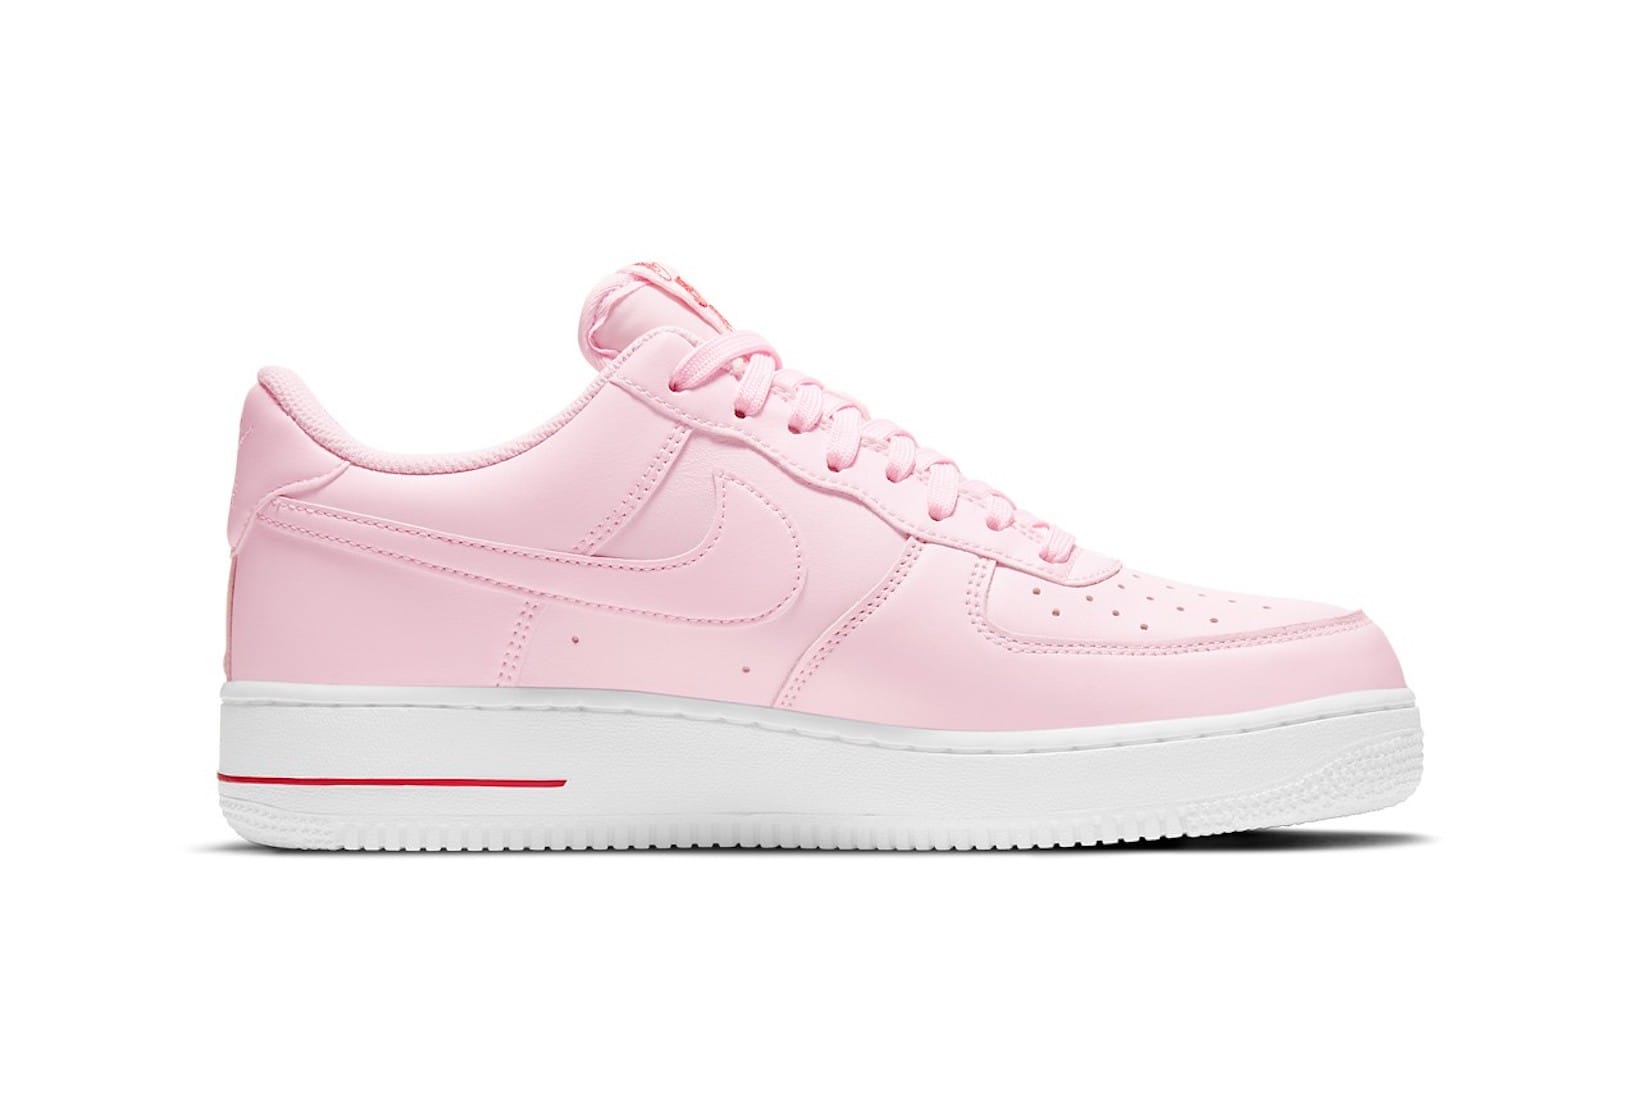 airforce 1 white and pink